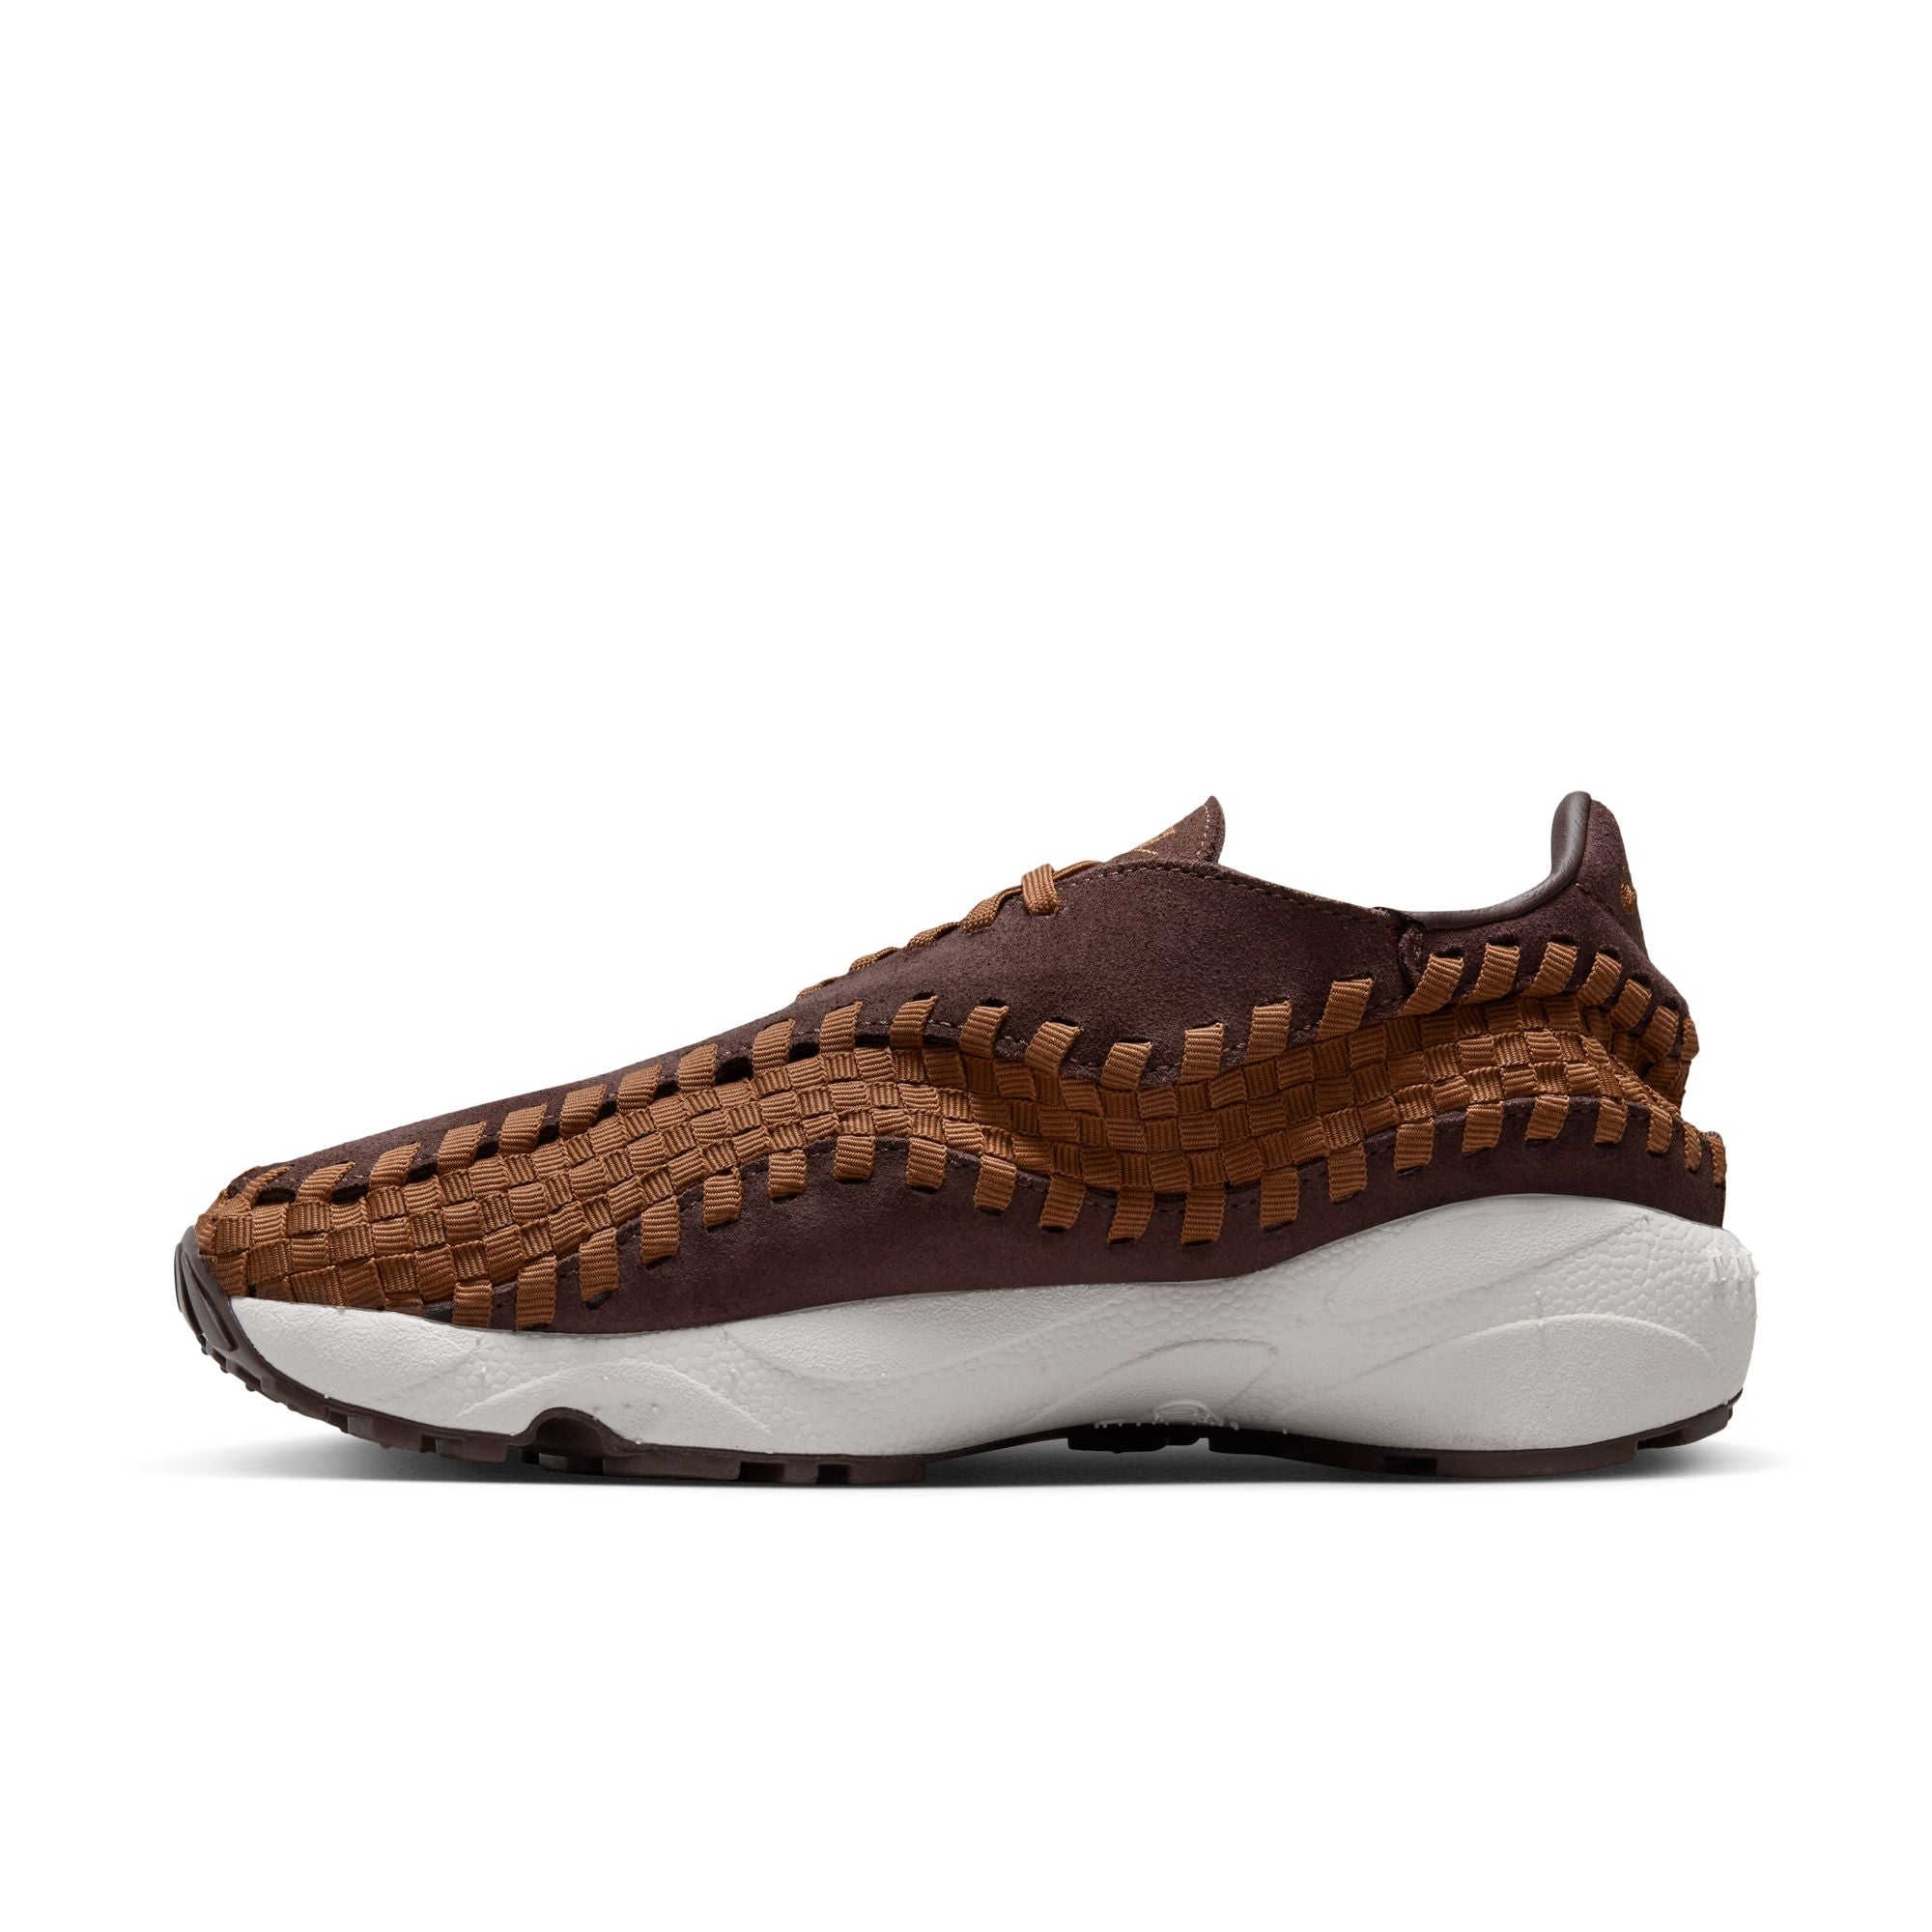 Air Footscape Woven 'Saturn Gold and Earth' W - INVINCIBLE